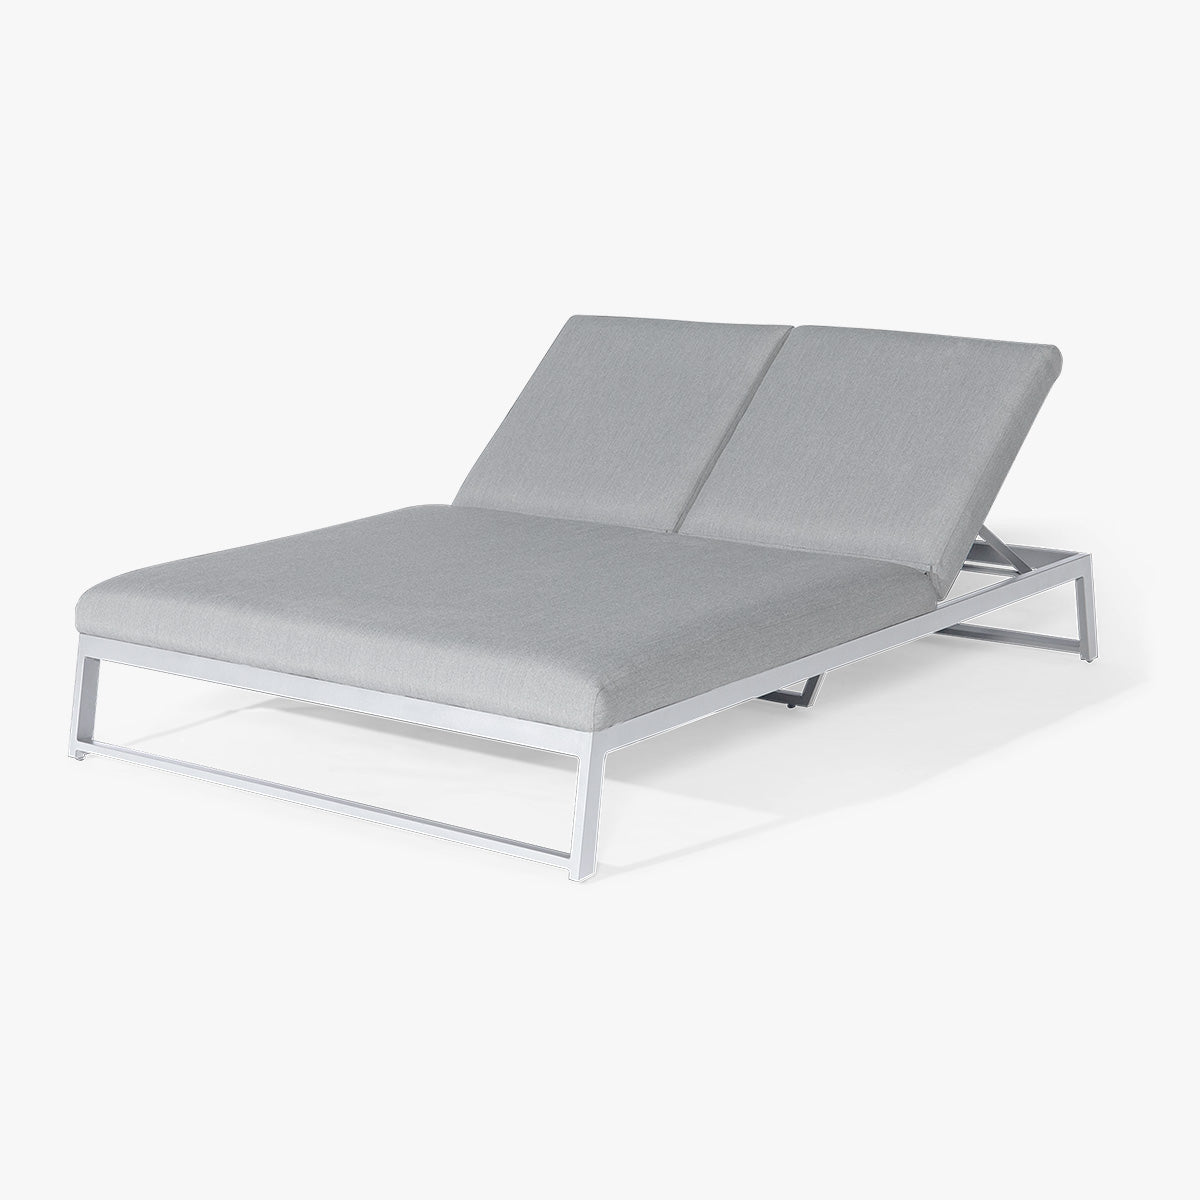 Outdoor Fabric Allure Double Sunlounger